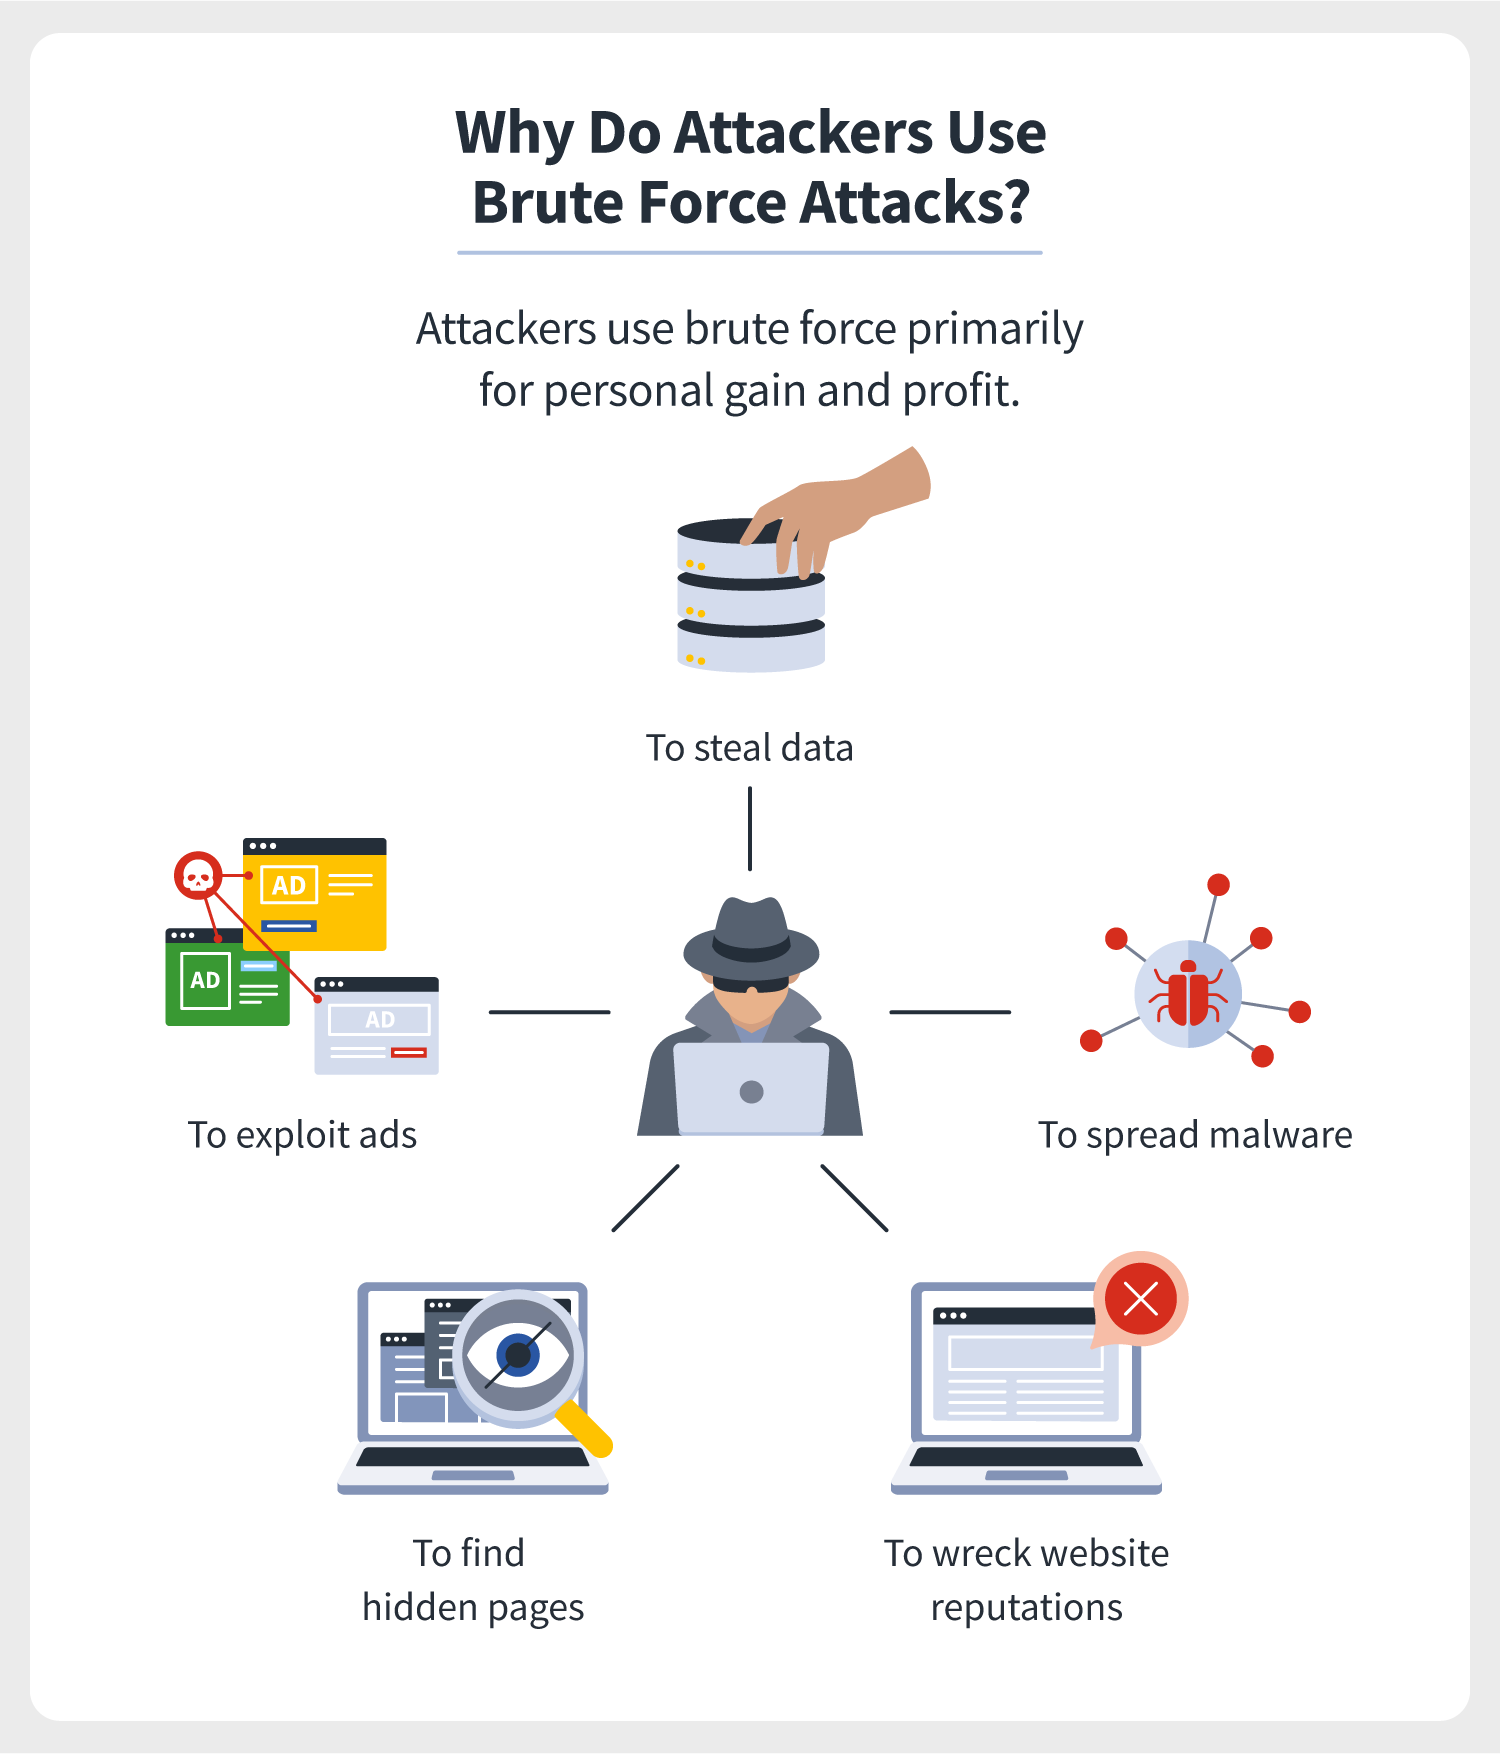 Why do attackers use brute force attacks